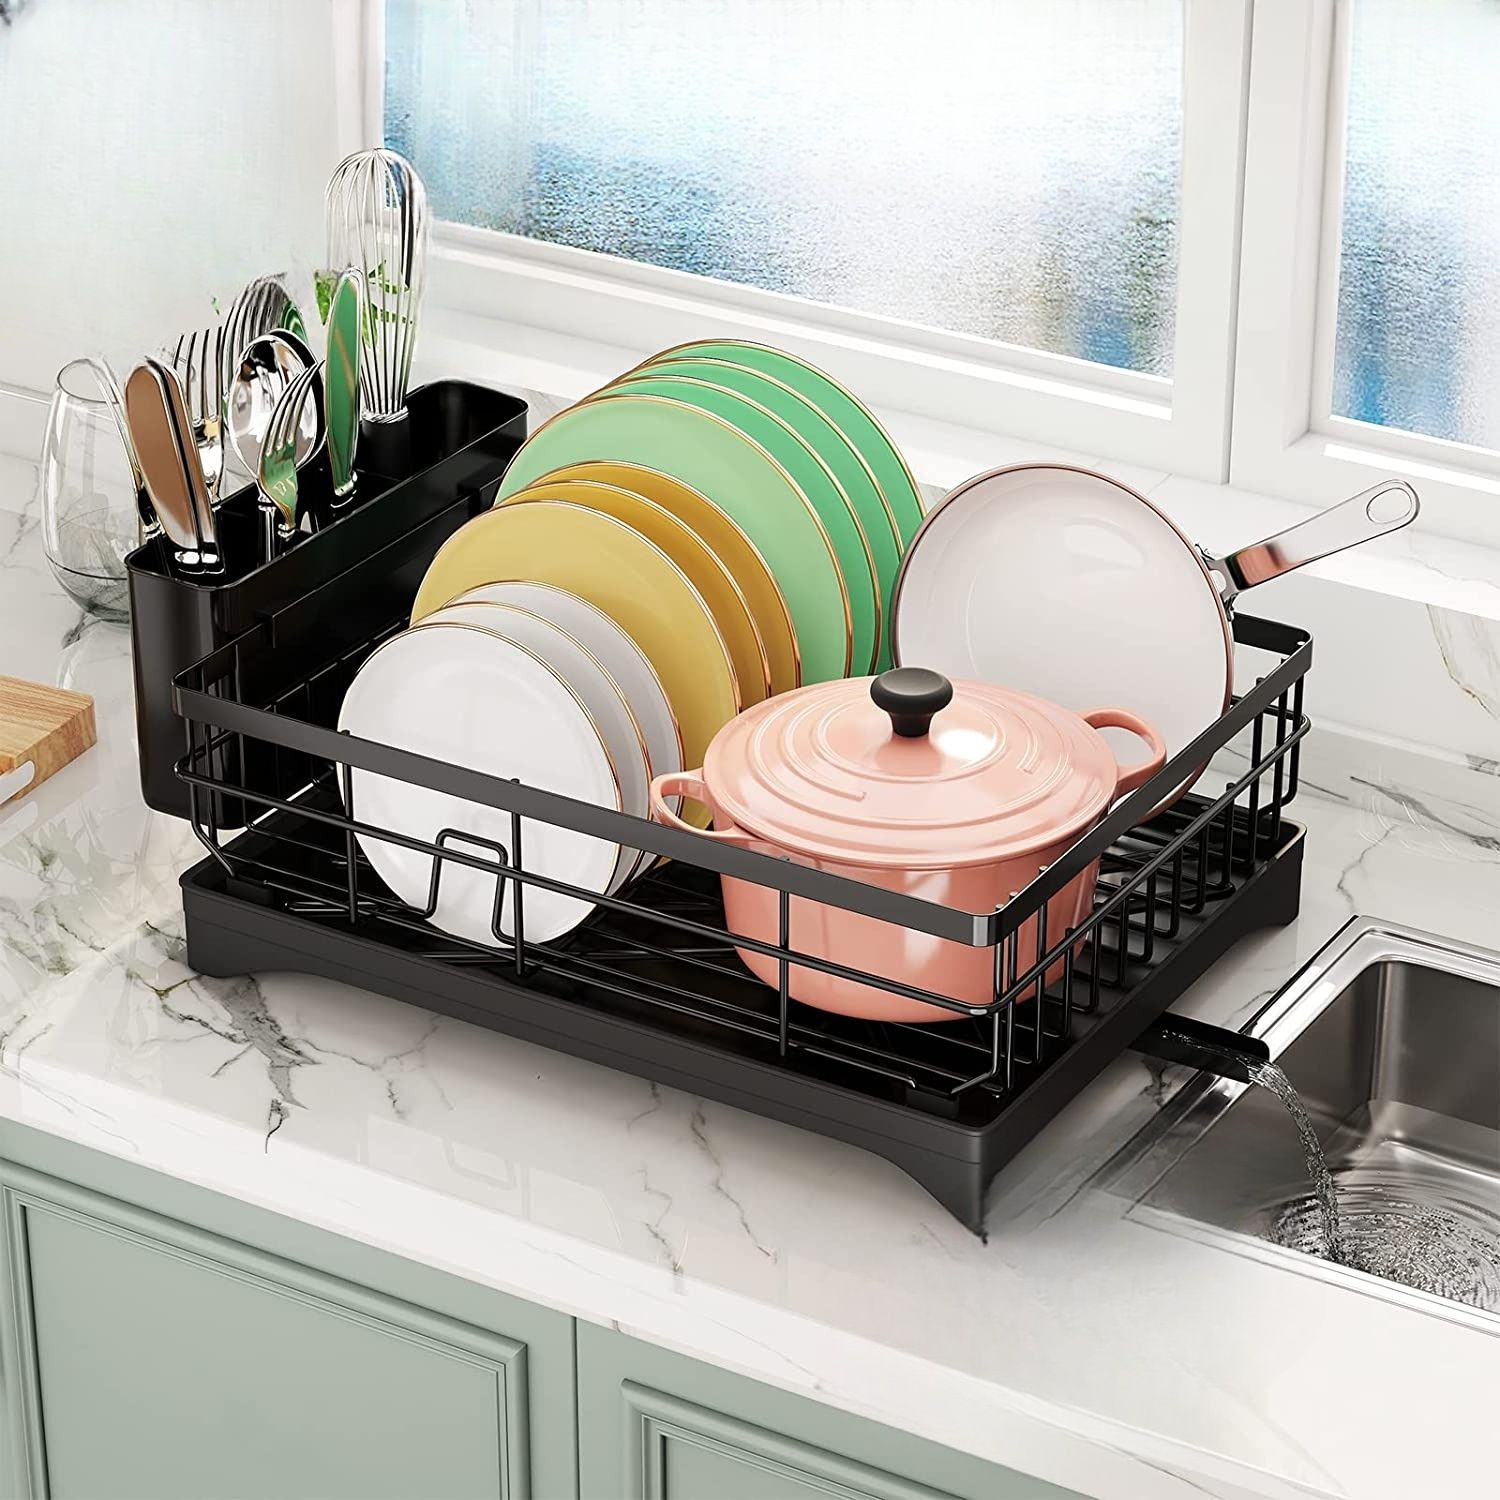 Table Top With Water Receiving Tray, Chopsticks Tube Rack, Water Cup Rack,  Kitchen Sink Rack, Single Layer, Double Layer Bowl And Dish Drainage Rack  From Fanyu8888, $136.69